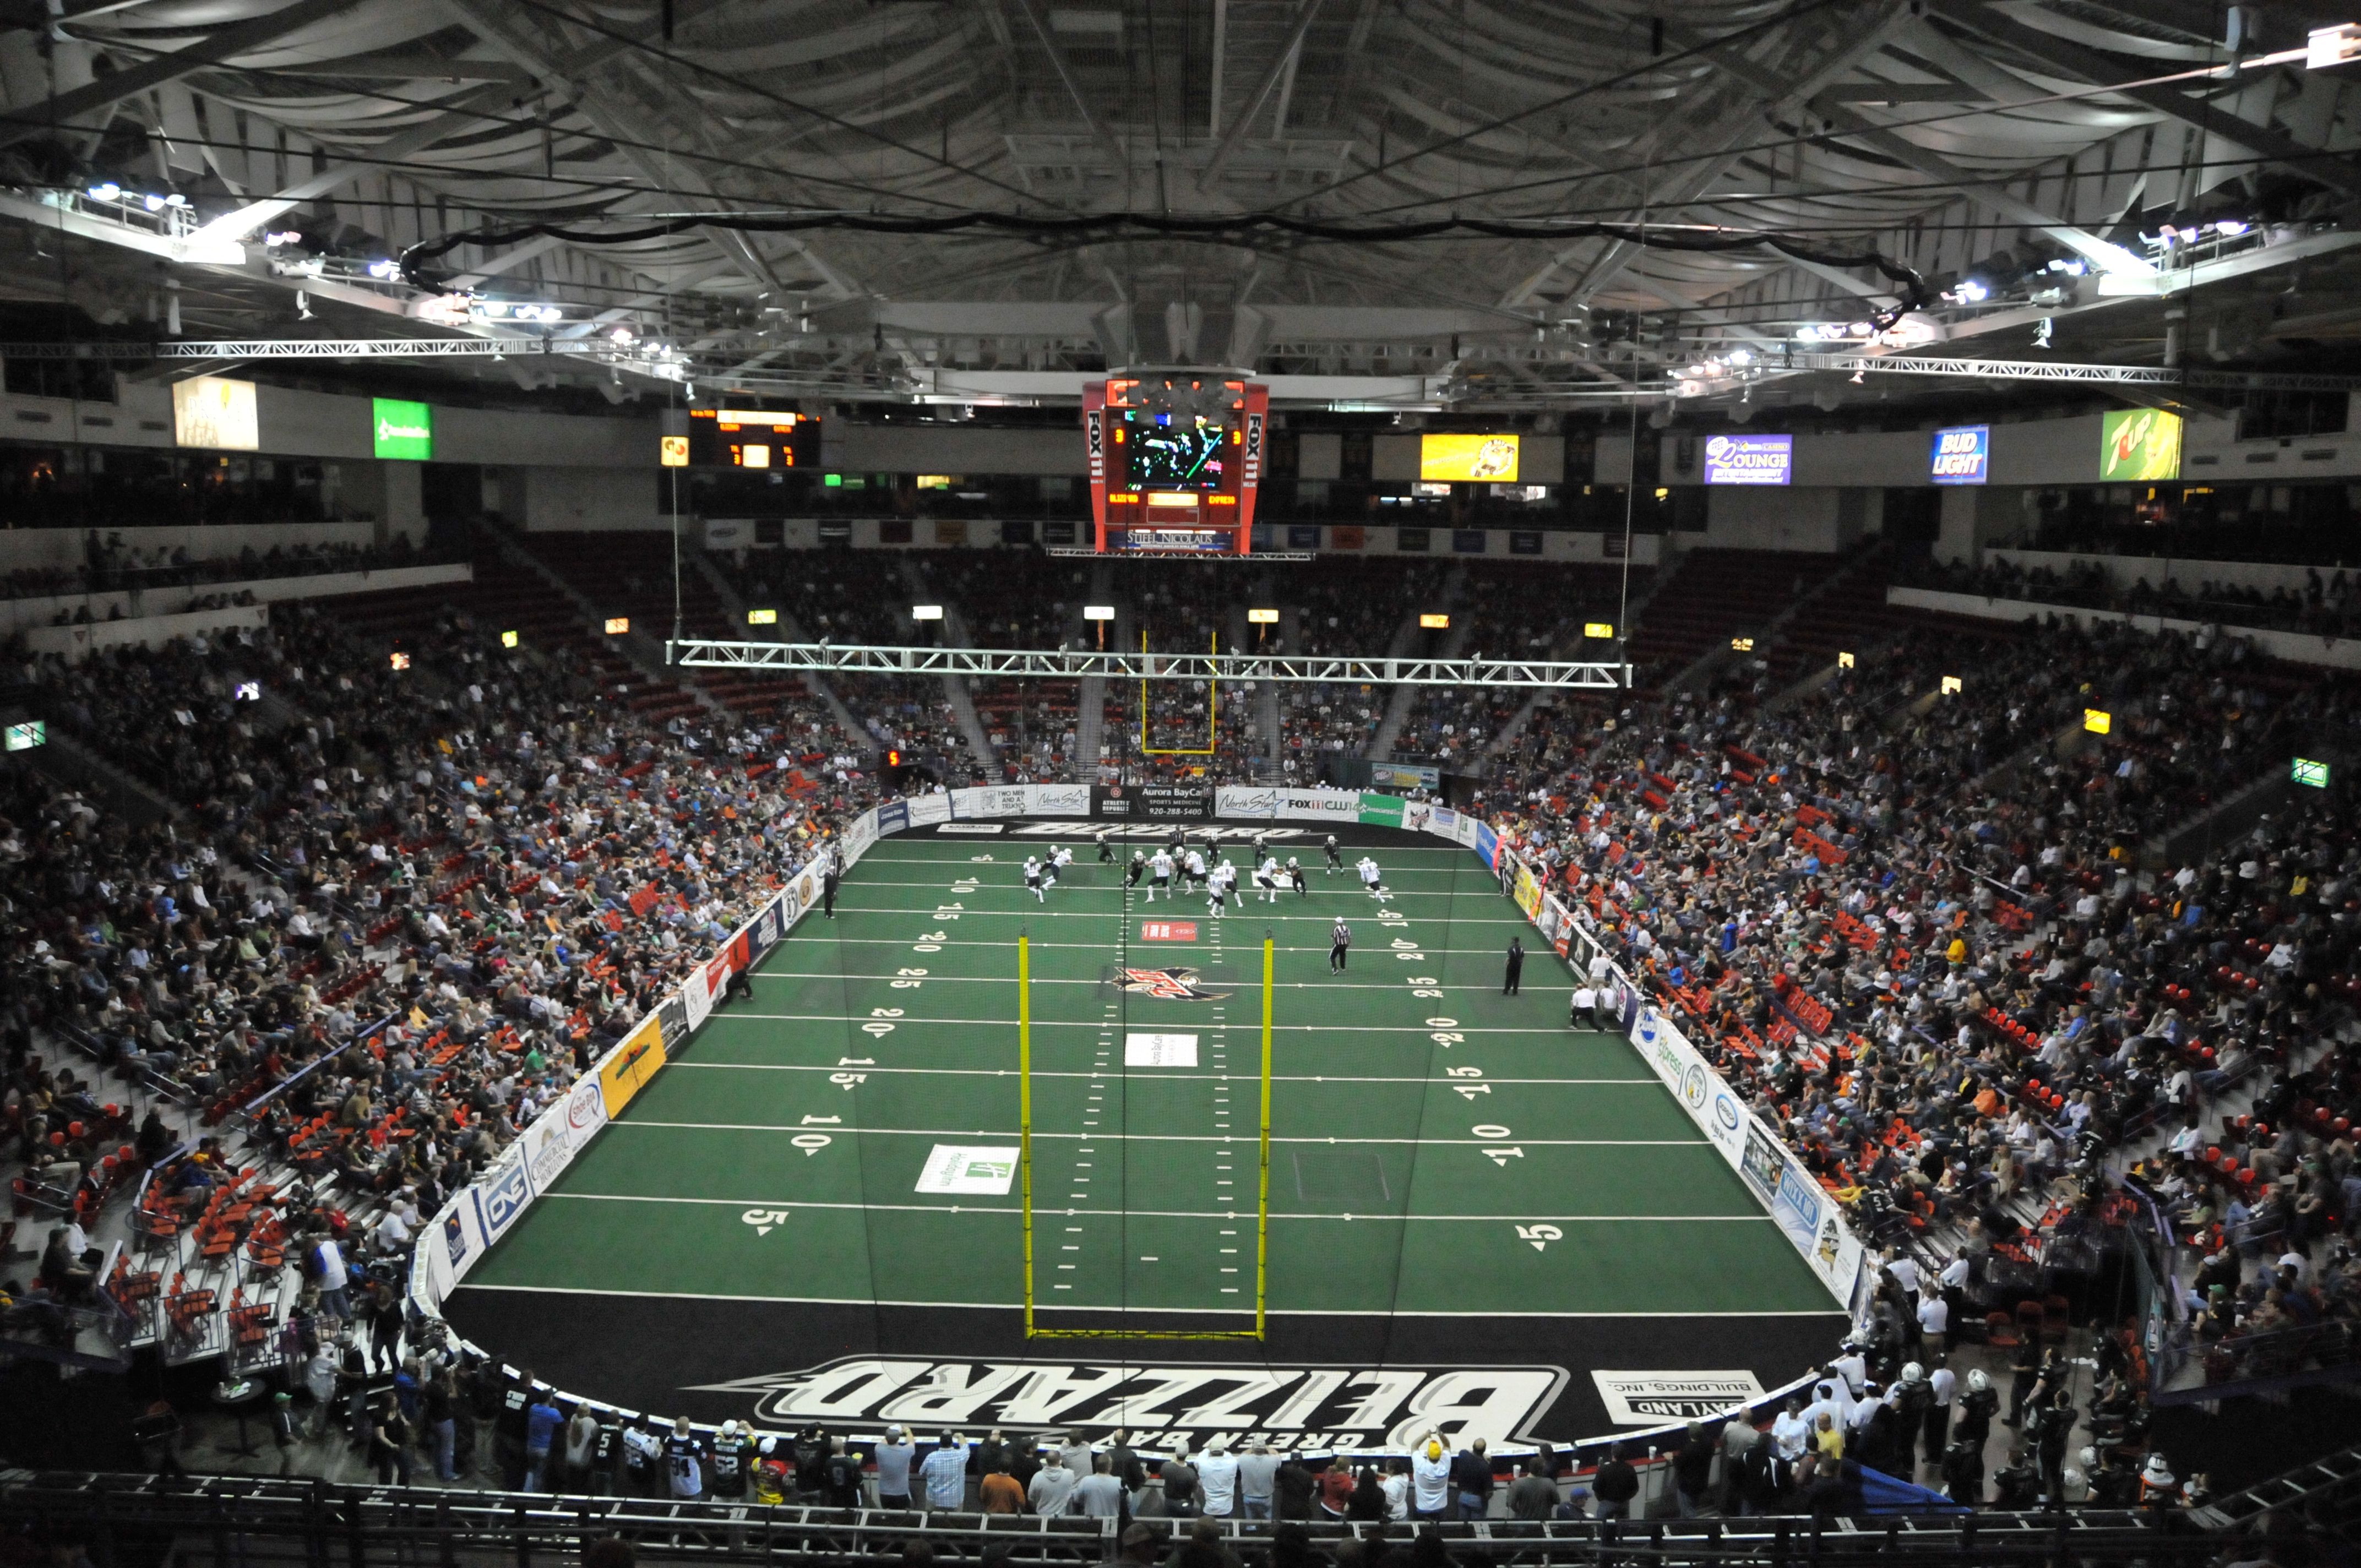 Green Bay Blizzard Luxury Suite with 16 Tickets to a Green Bay Blizzard Game